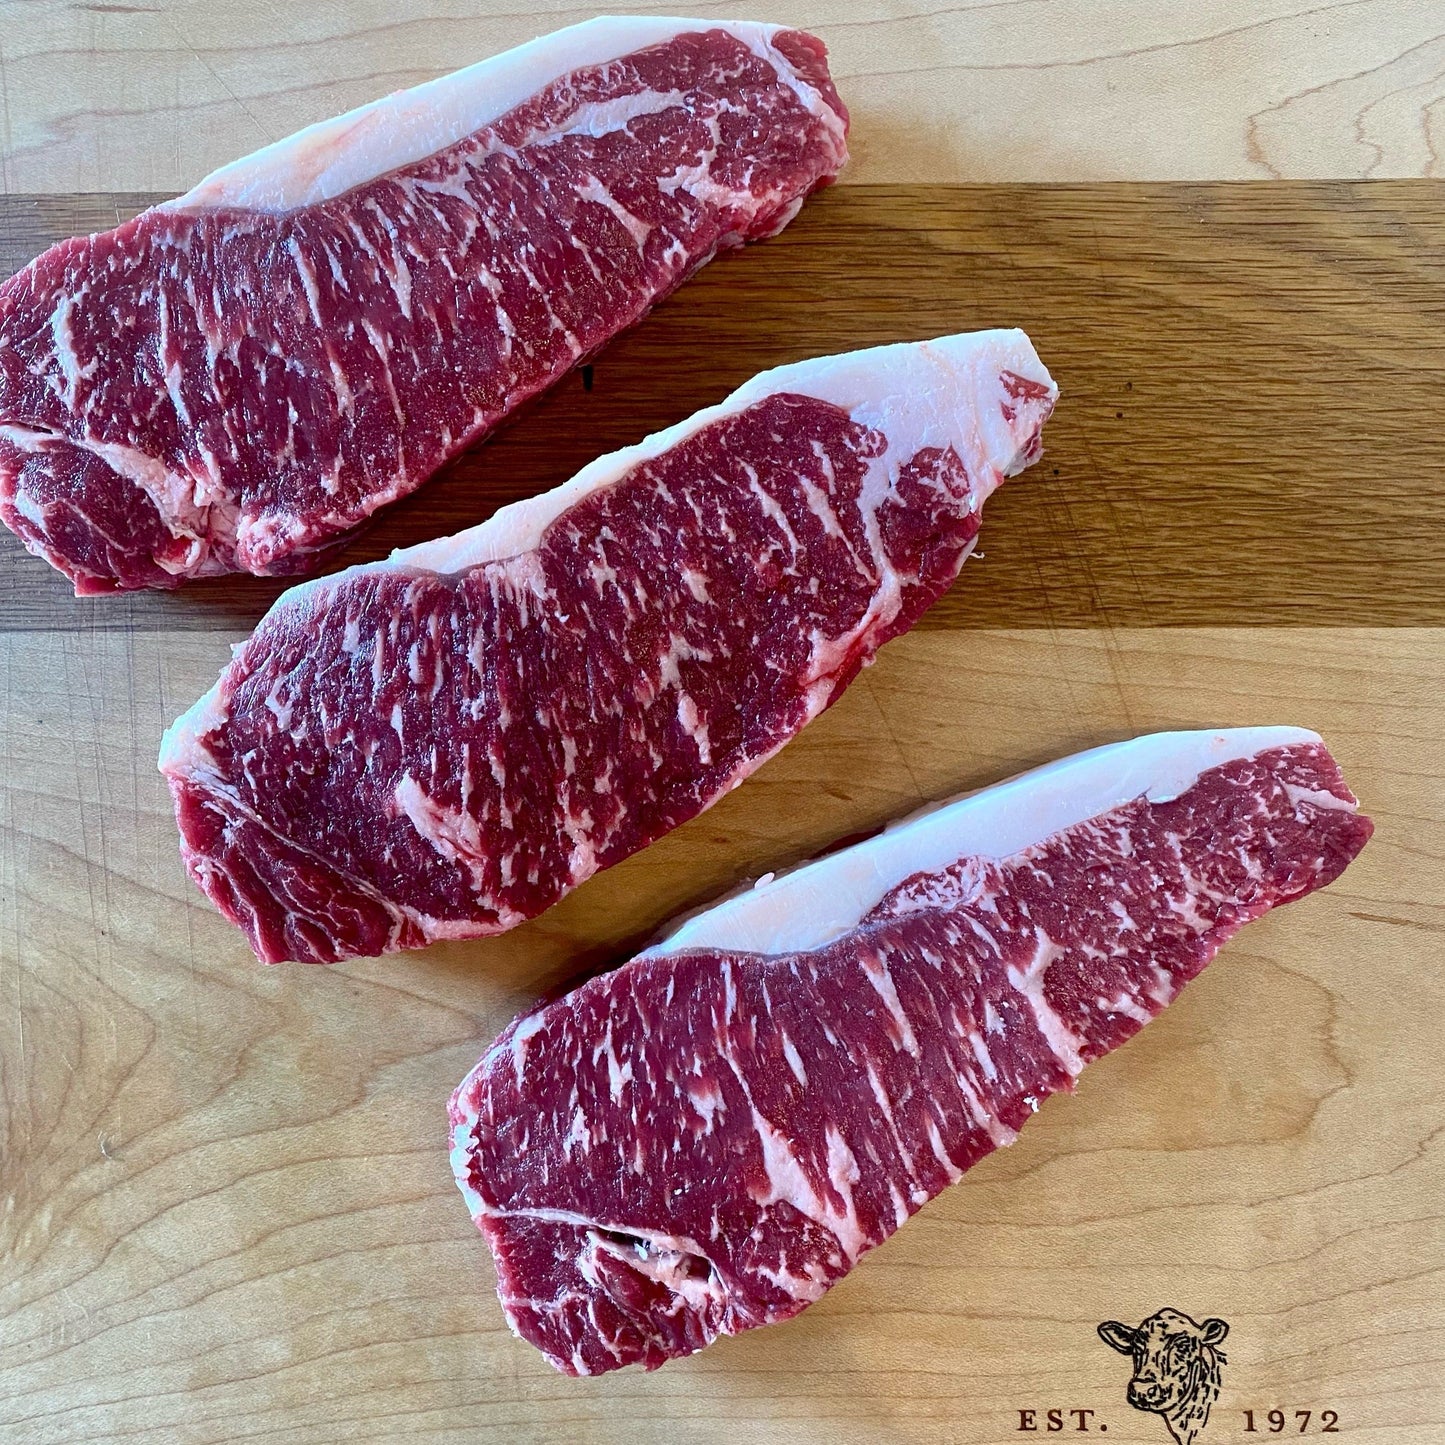 January 16th: All Things Steak with the Butchers